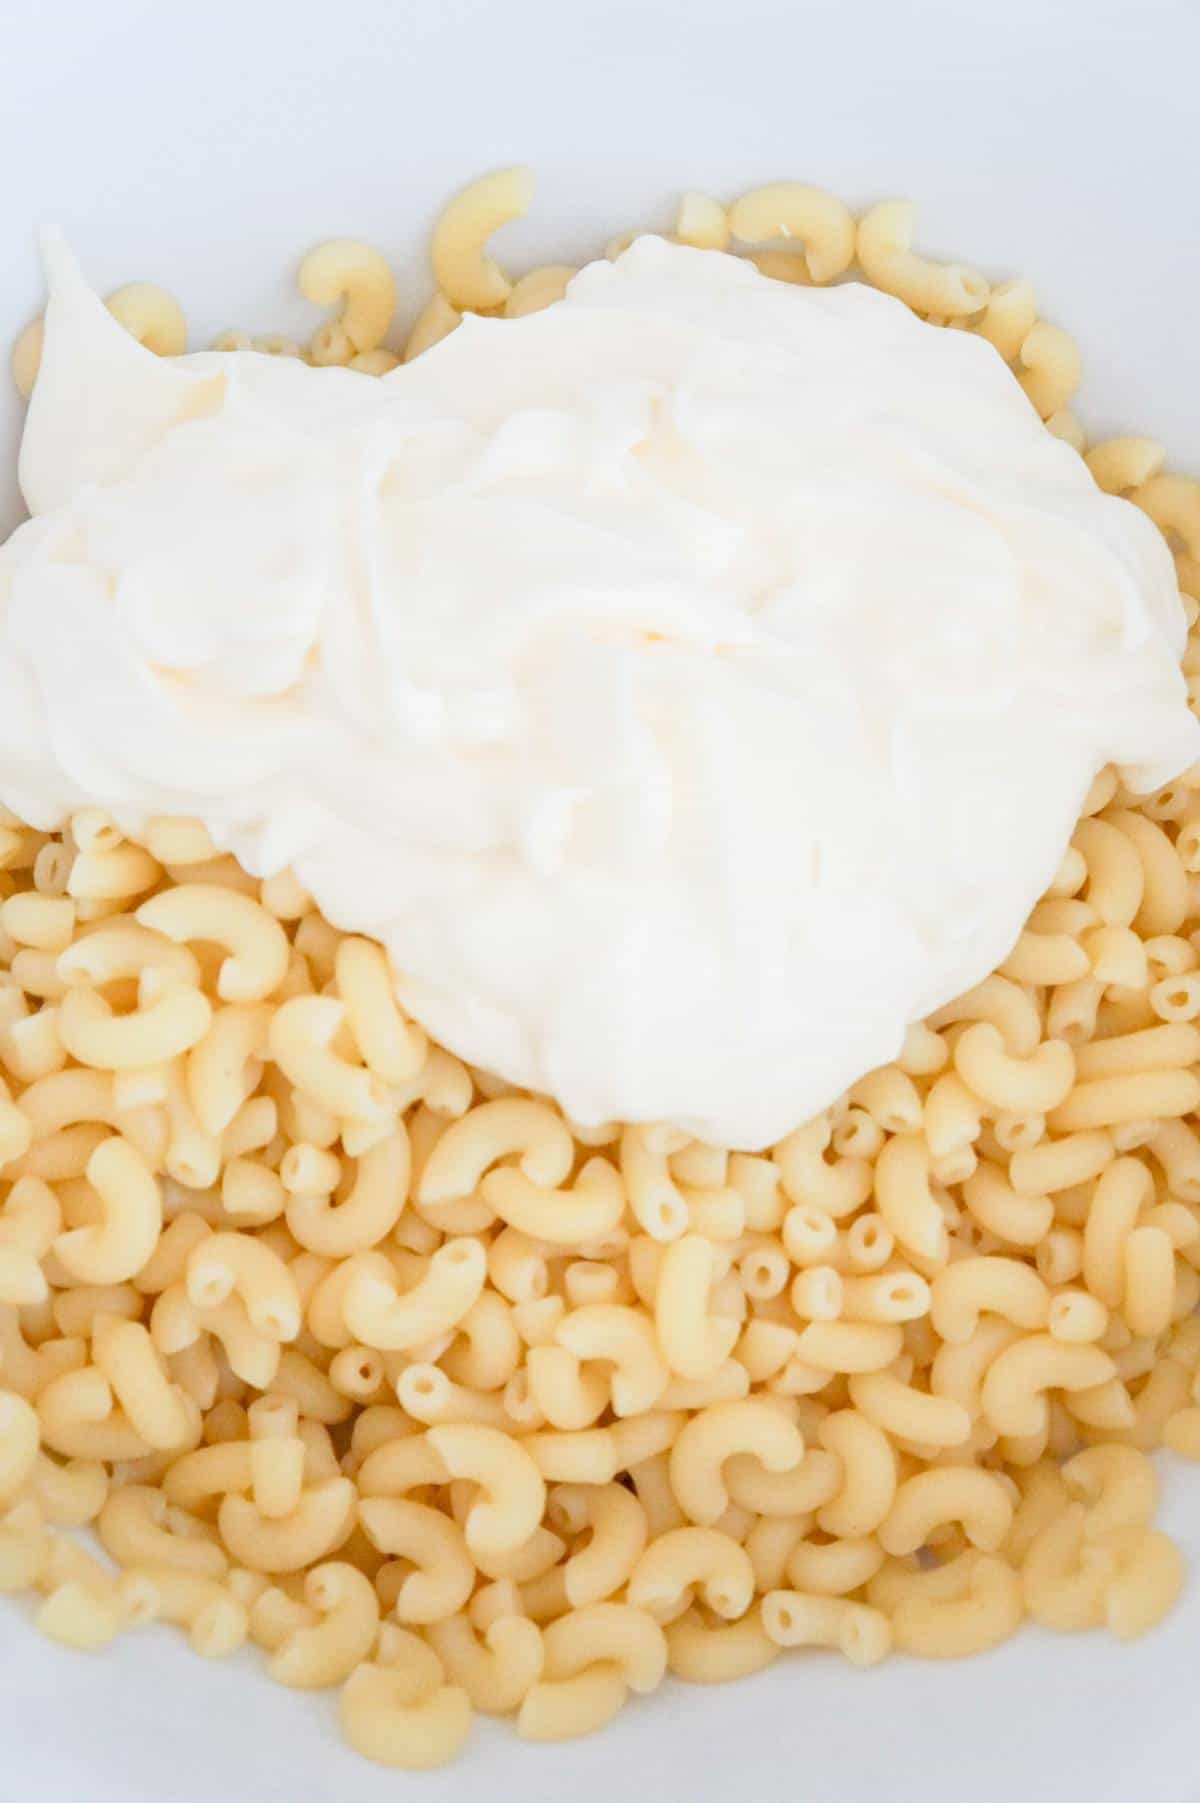 mayo on top of cooked macaroni noodles in a mixing bowl